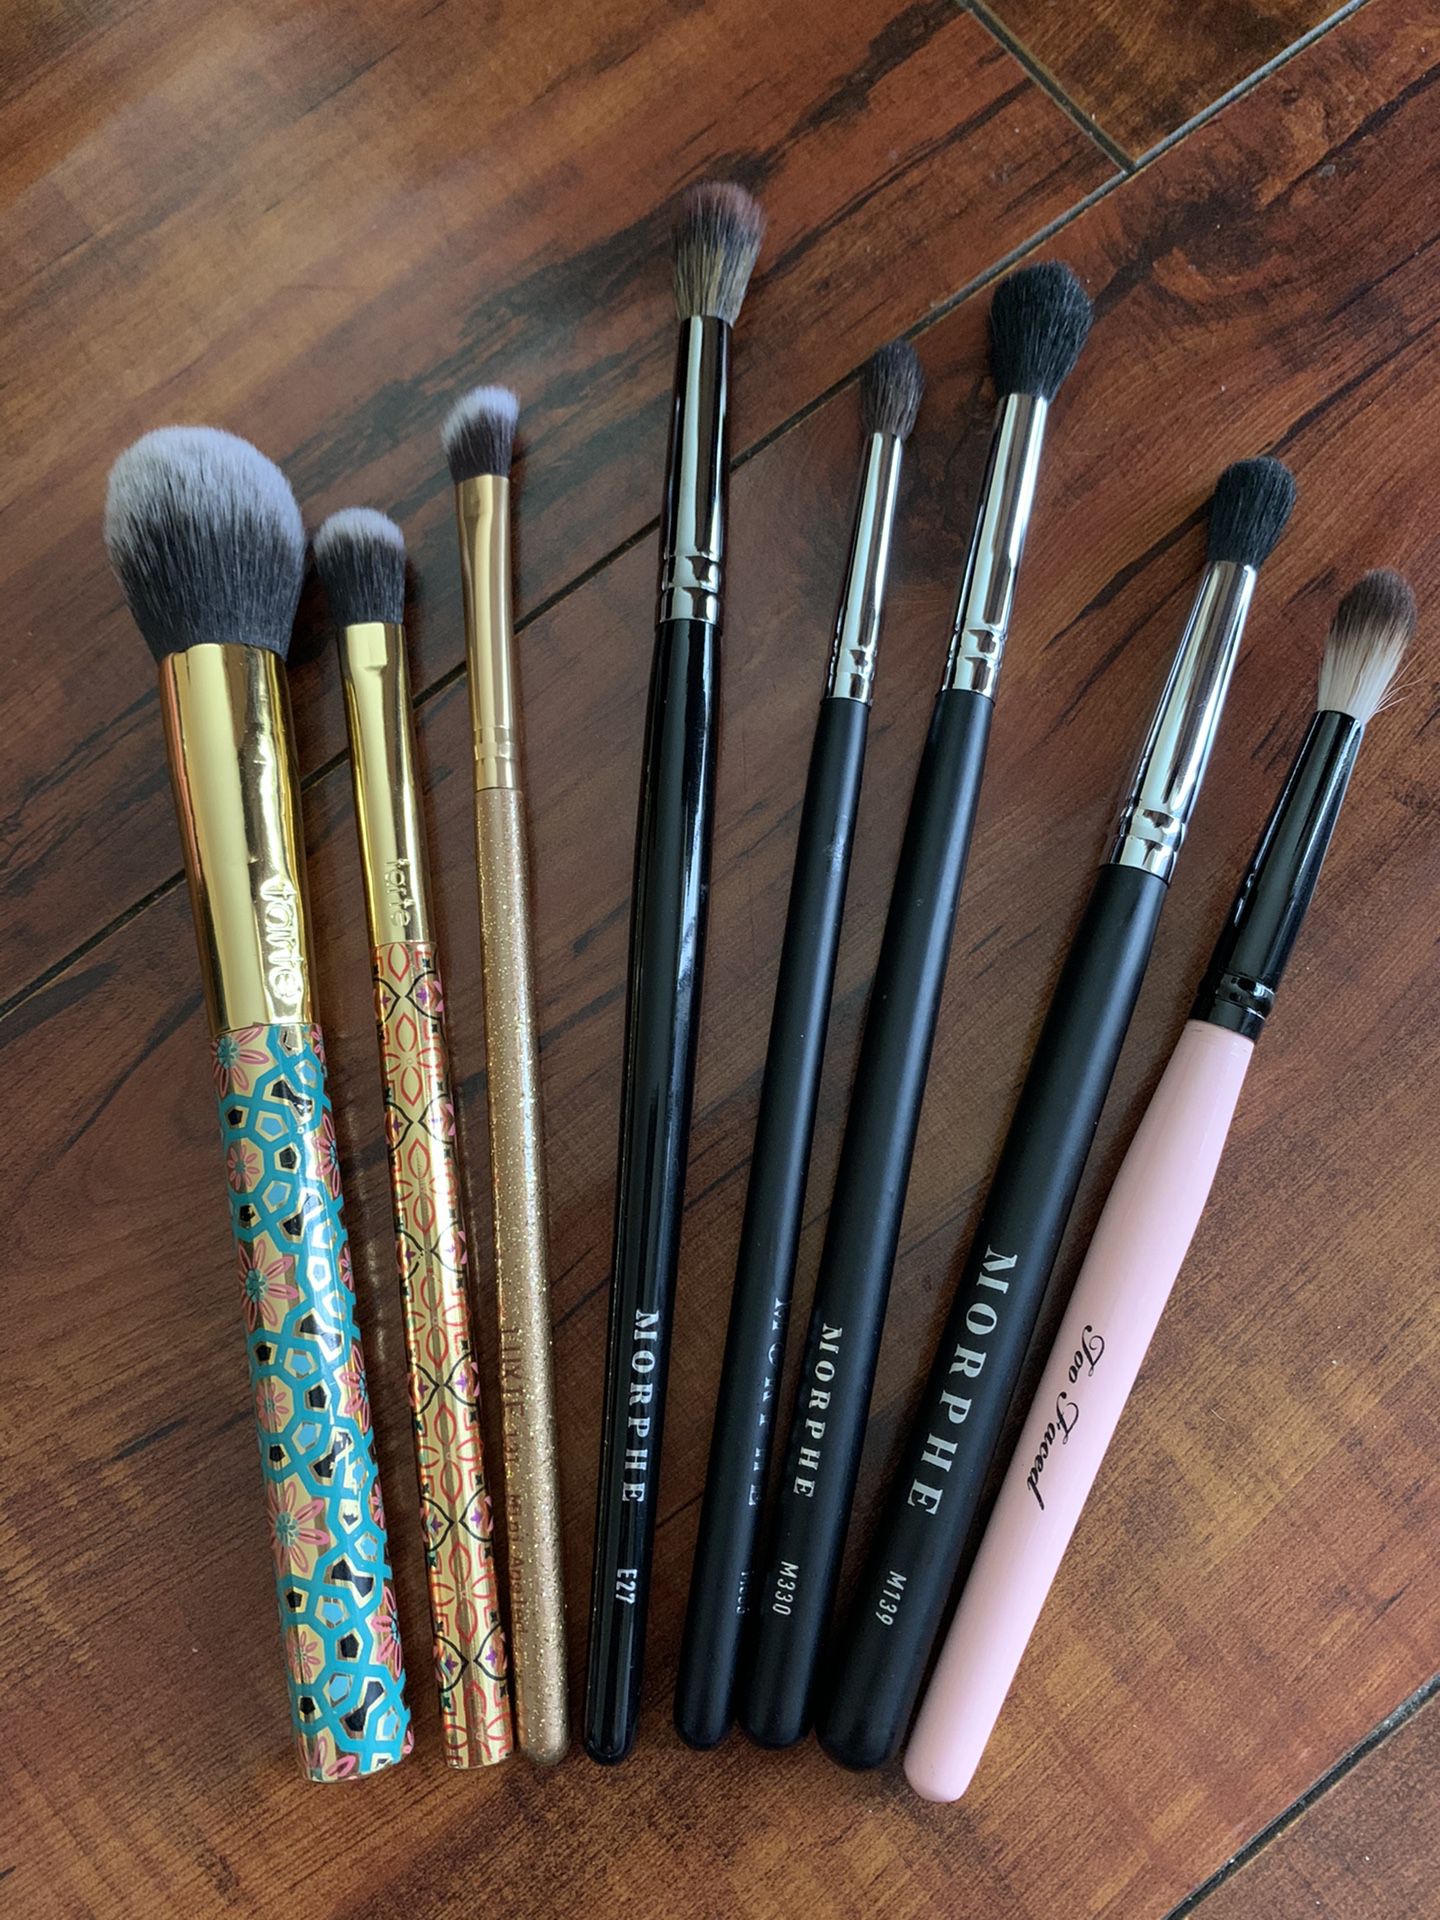 Morphe/Tarte/Too Faced/Luxie Makeup Brushes